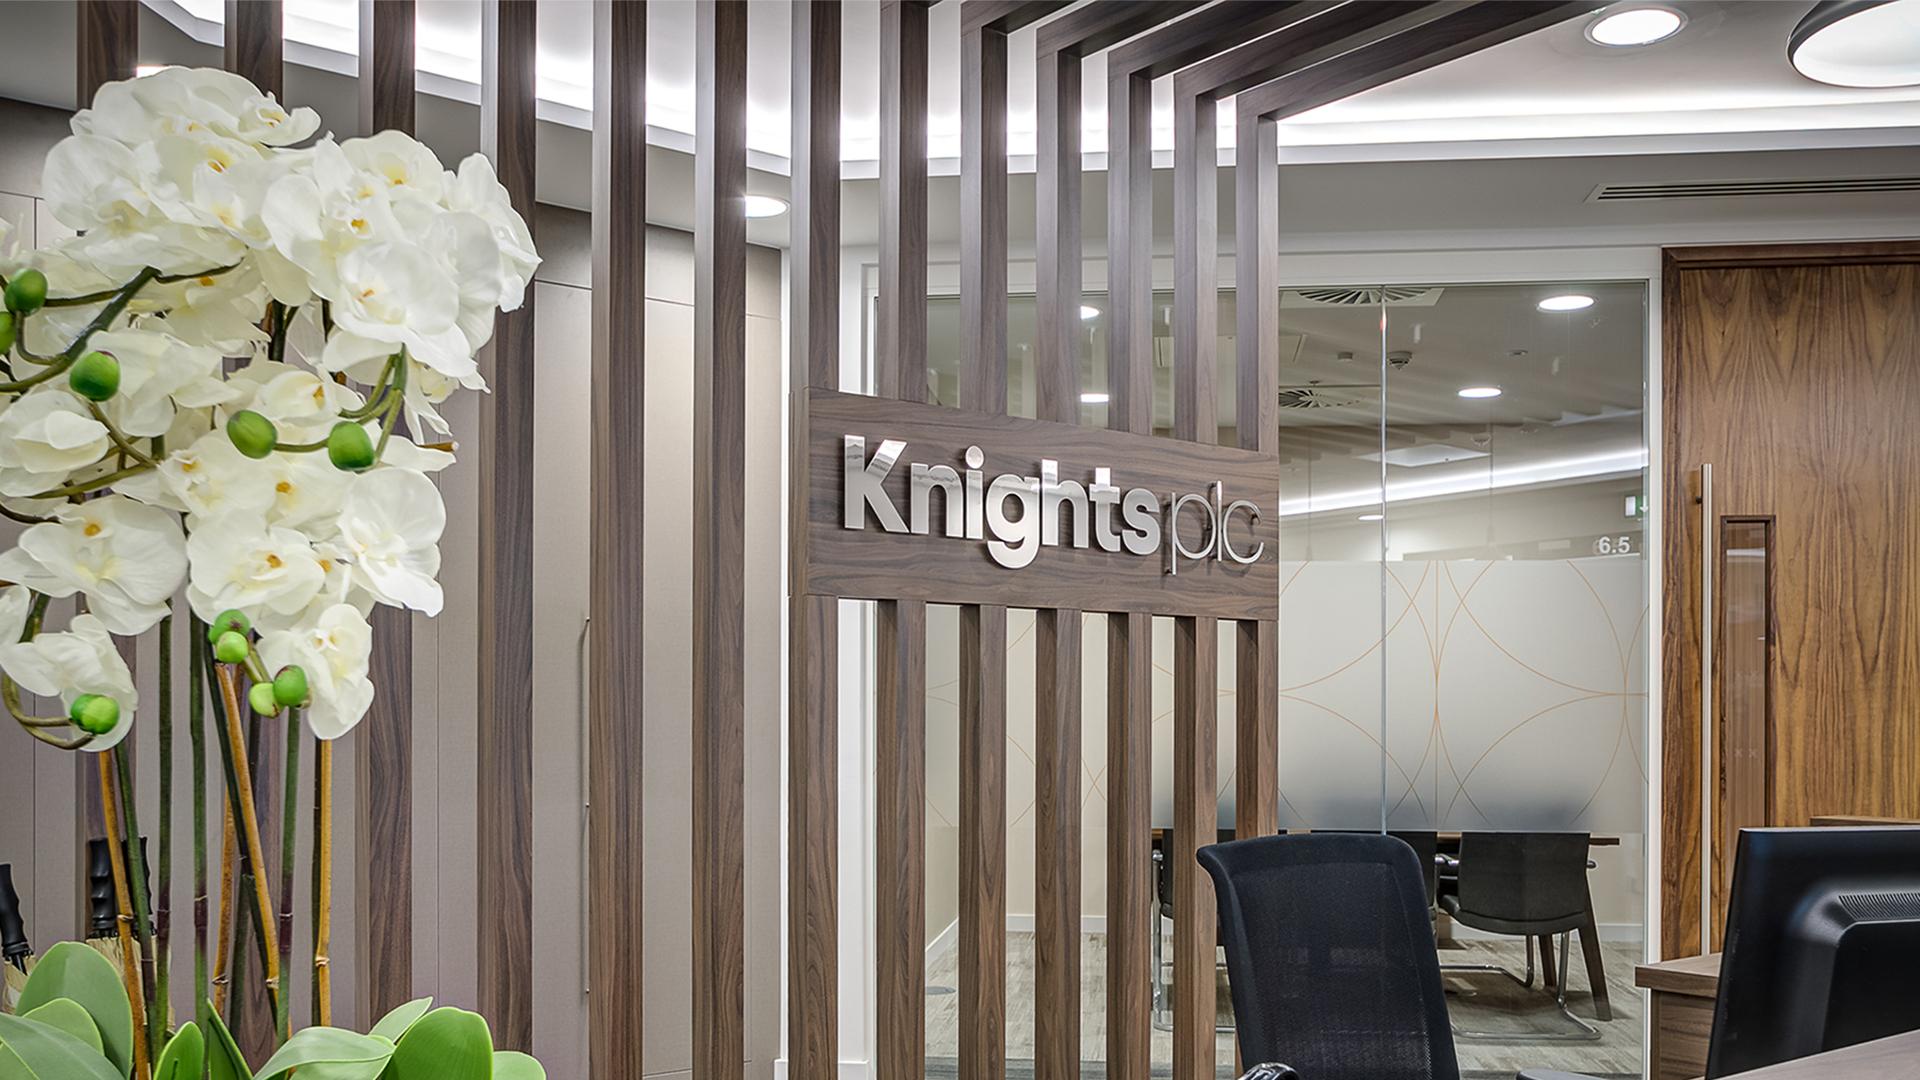 Legal firm Knights acquires York-based counterpart in £11.5m deal